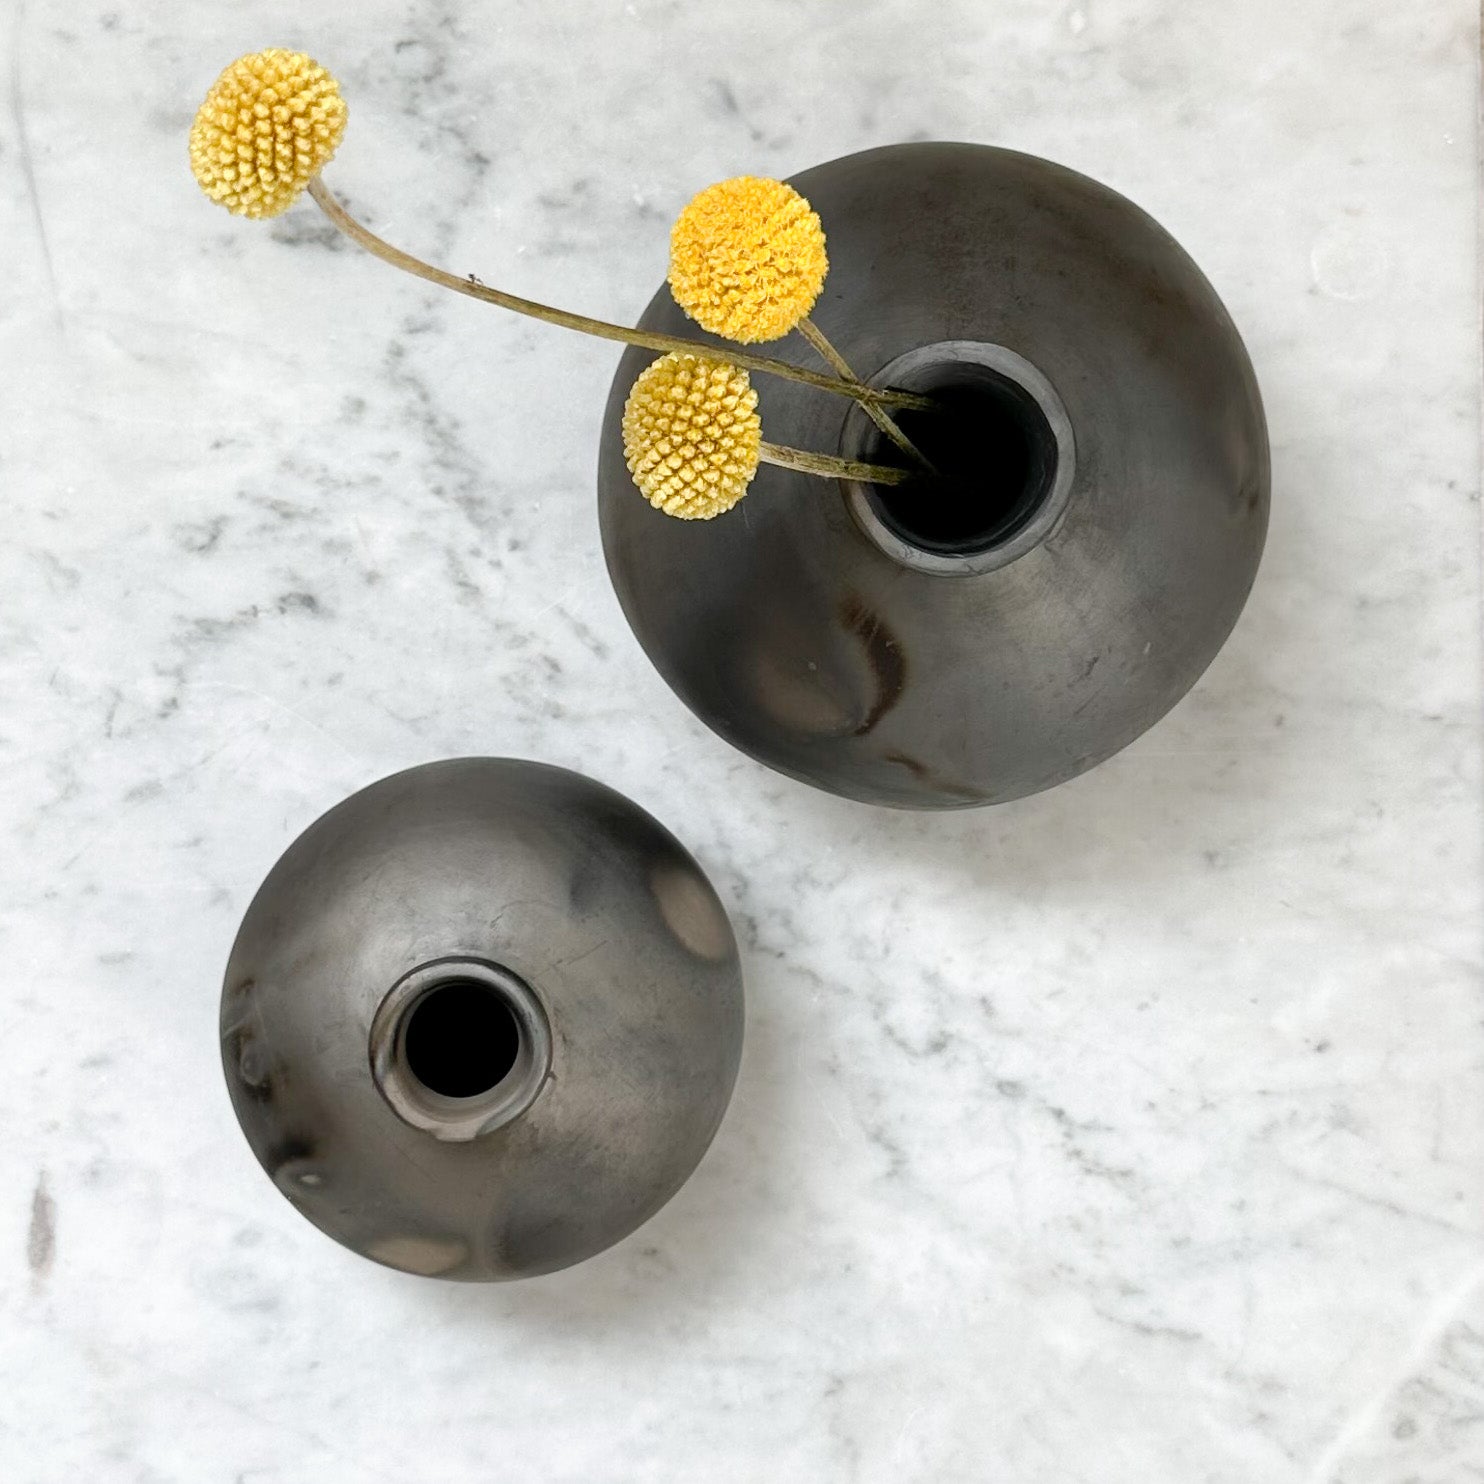 A pair of small and large Oaxaca clay bud vases with dry stems.